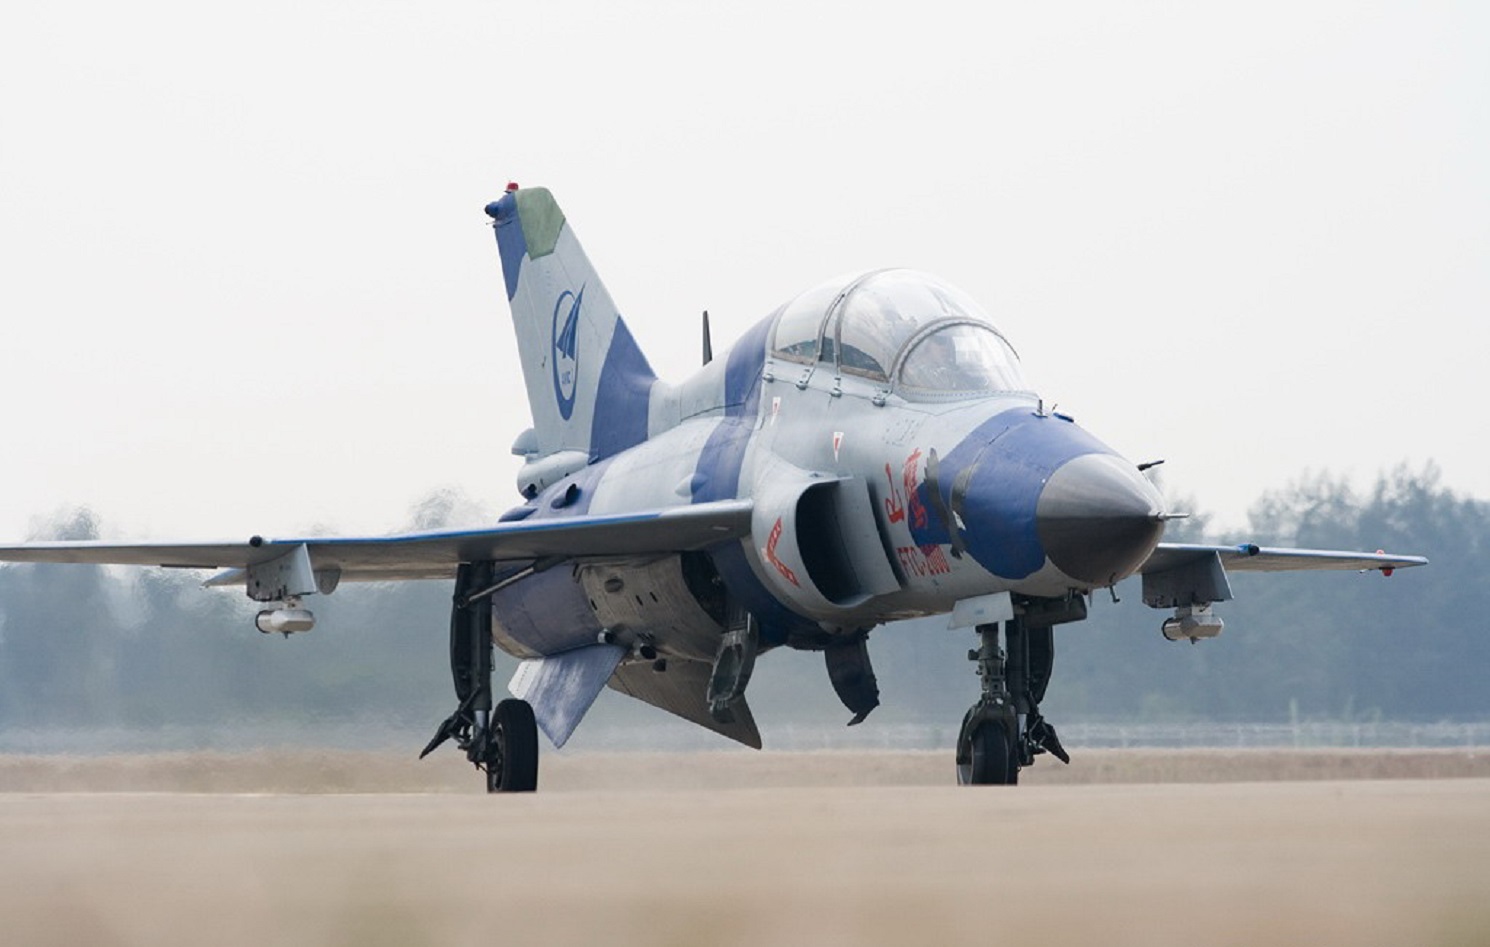 Image about Is Cambodia the Mystery Buyer of China’s FTC-2000G Trainer/Fighter Jet?